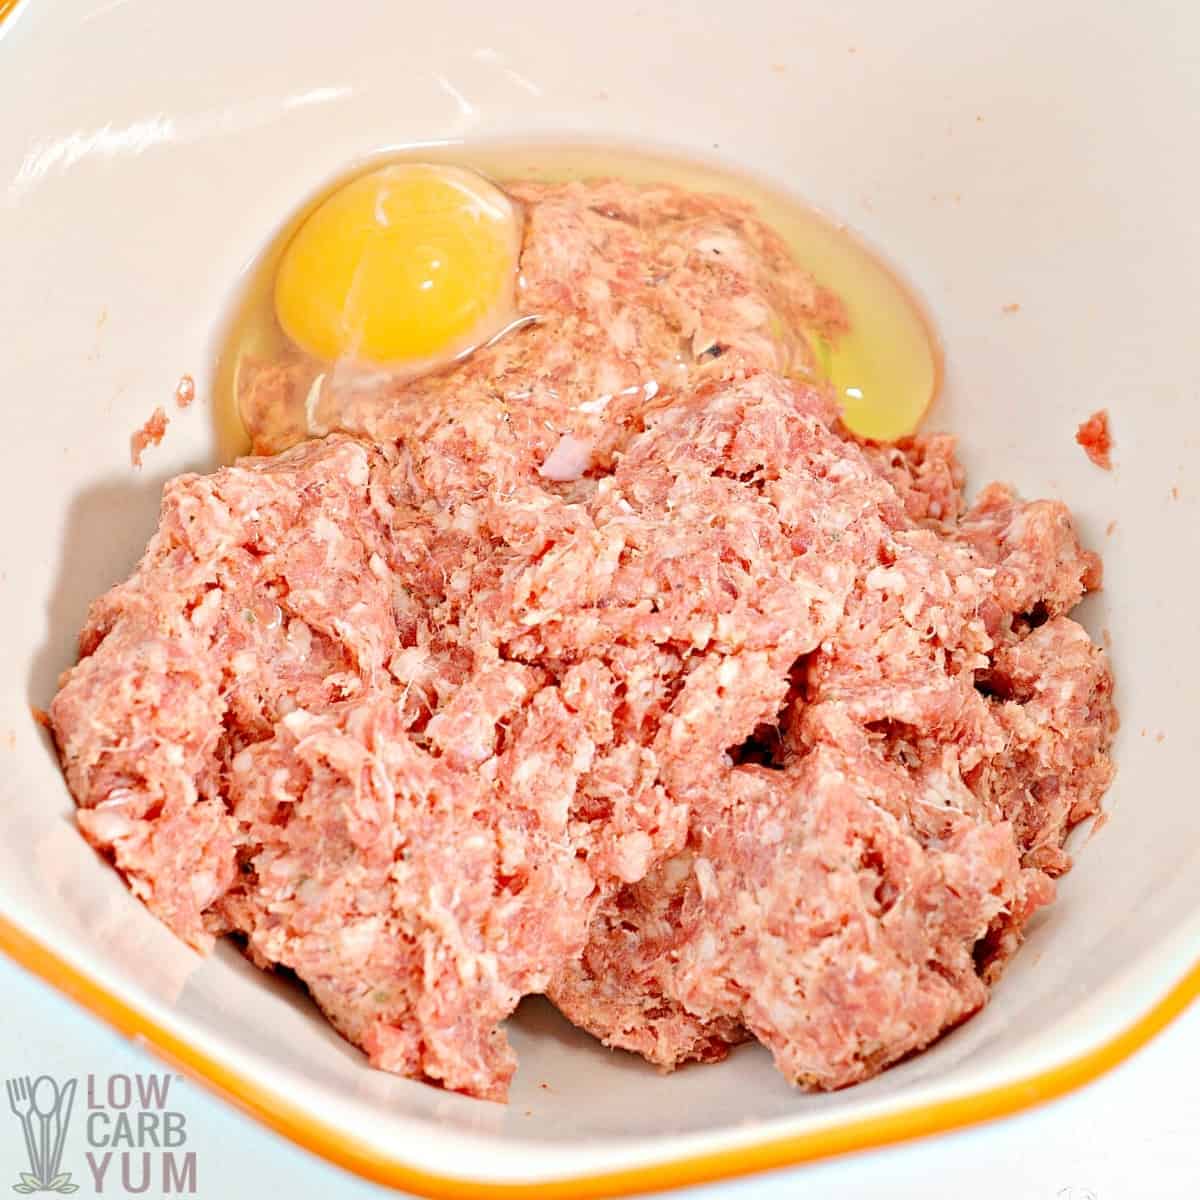 sausage and egg in bowl